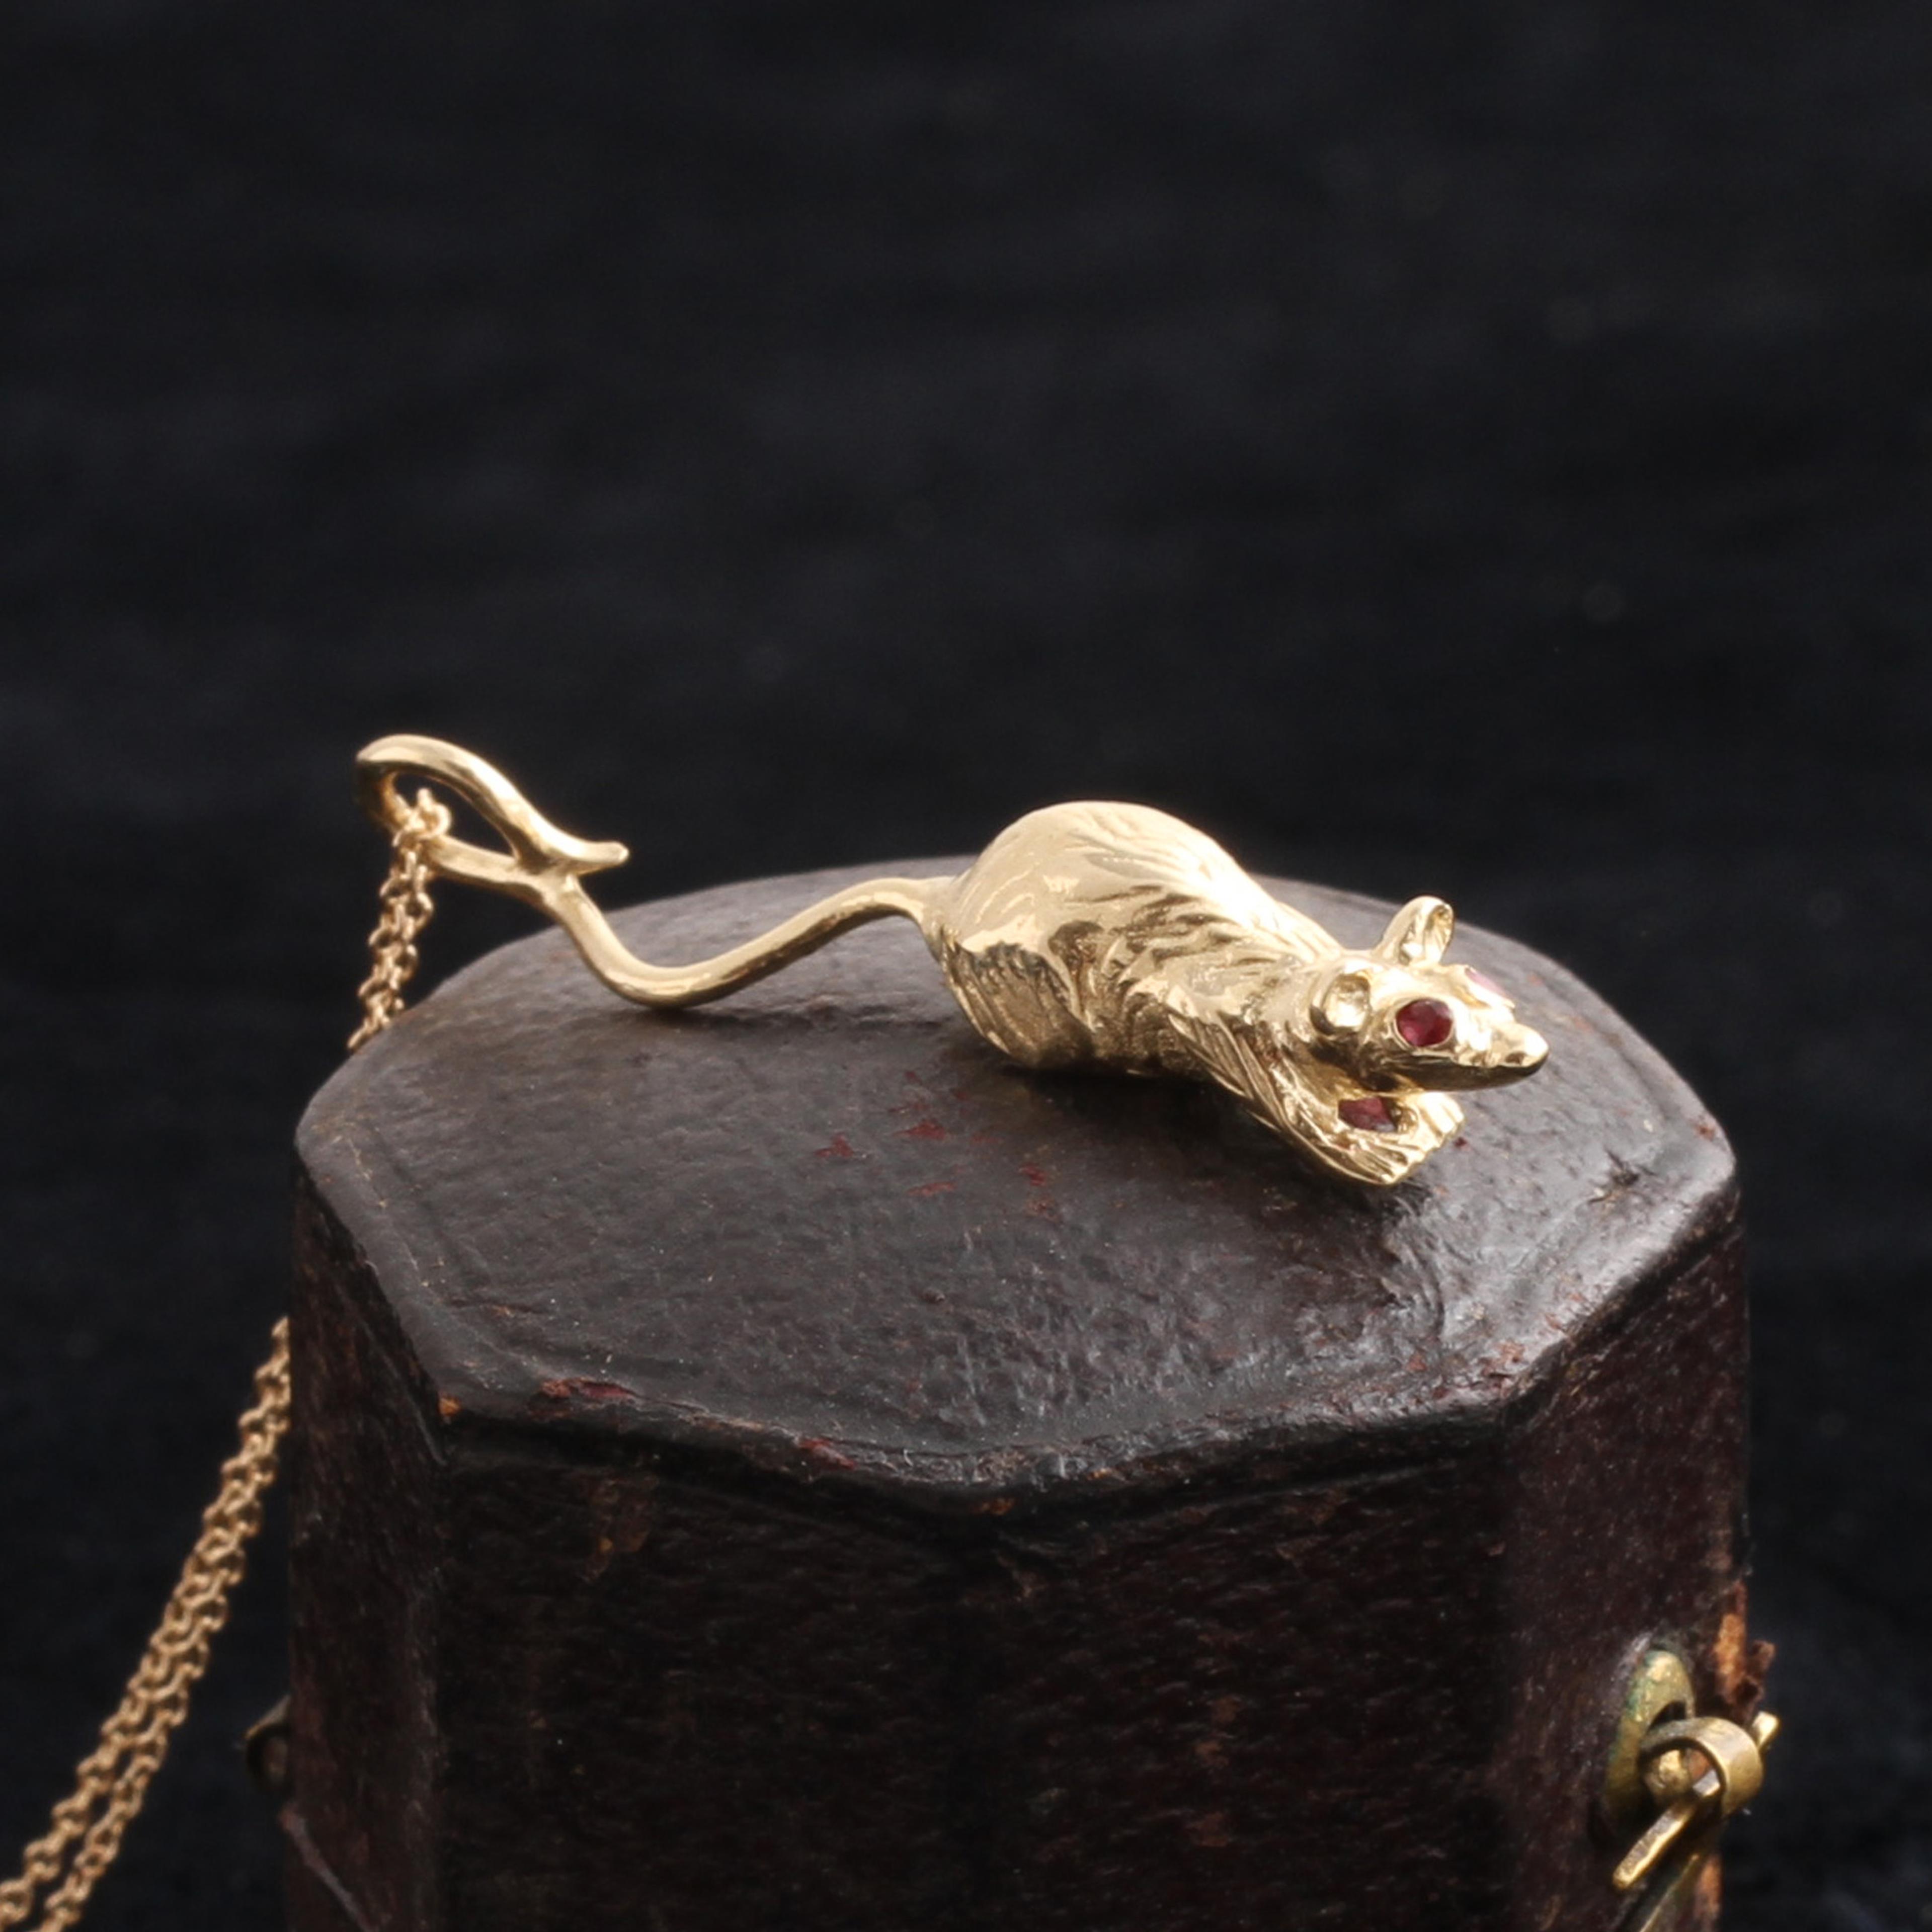 Detail of Ruby-Eyed Rat Necklace